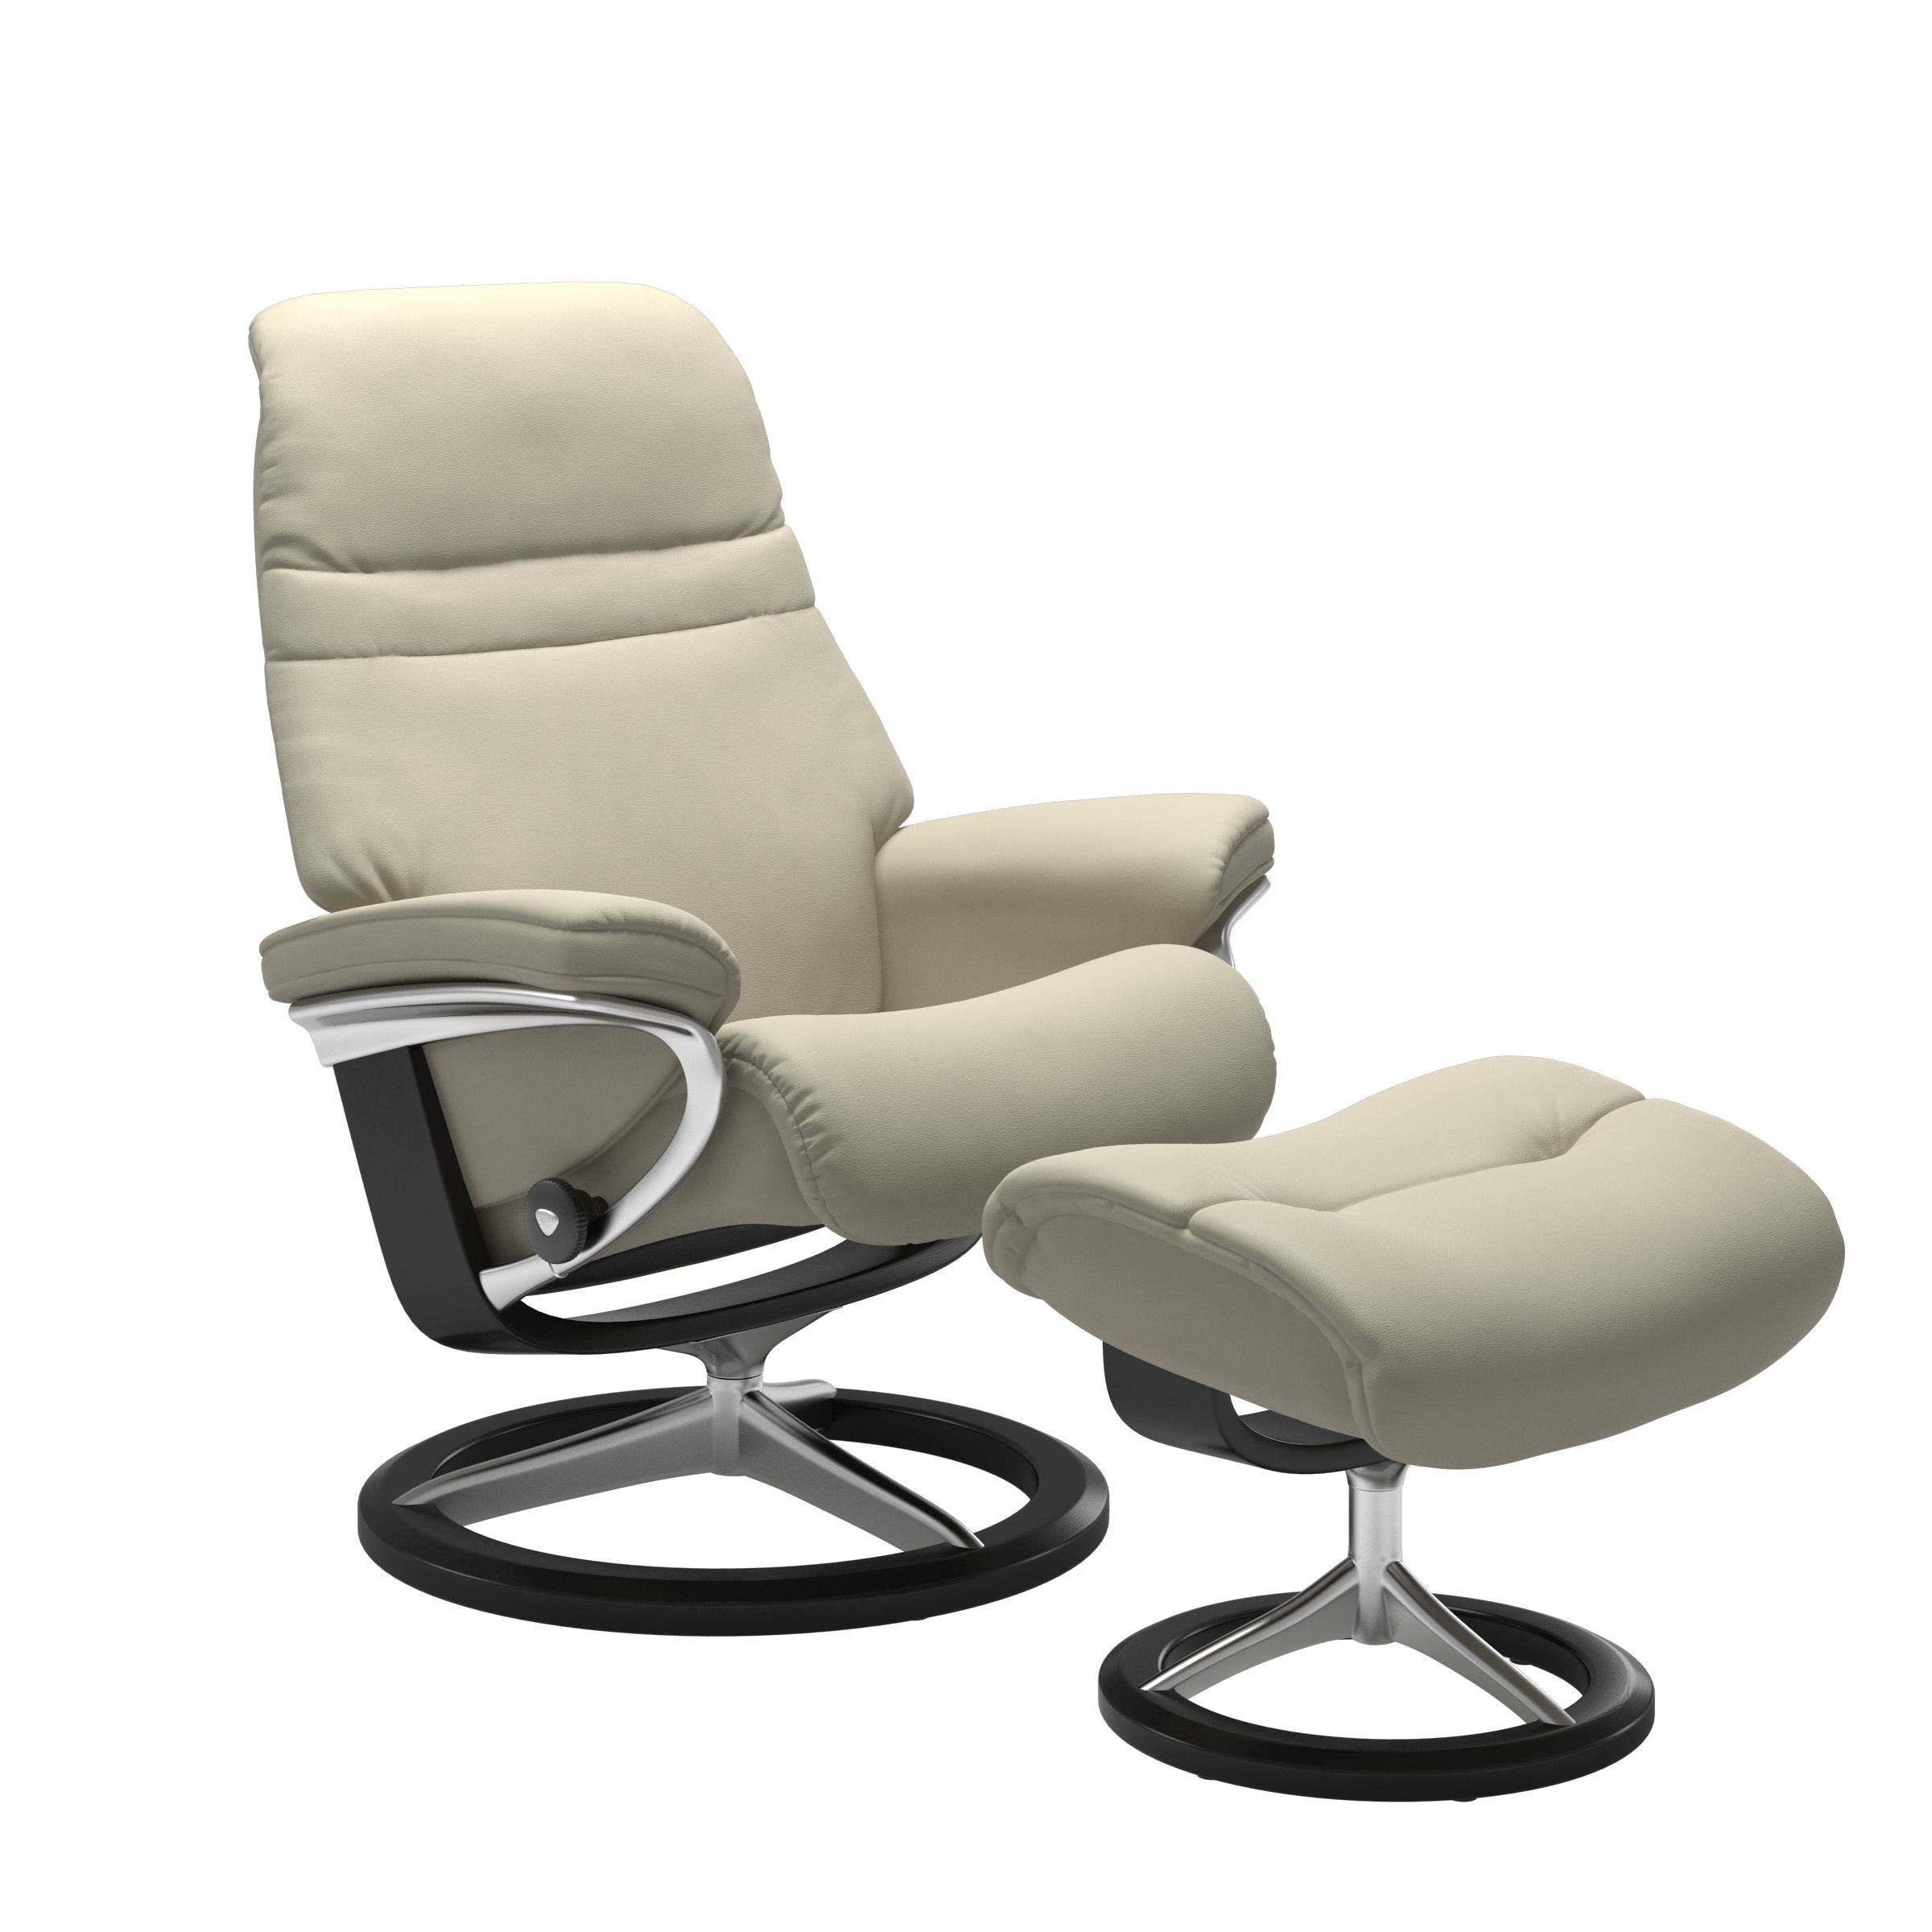 Stressless Sunrise Medium Recliner and Ottoman with Signature Base